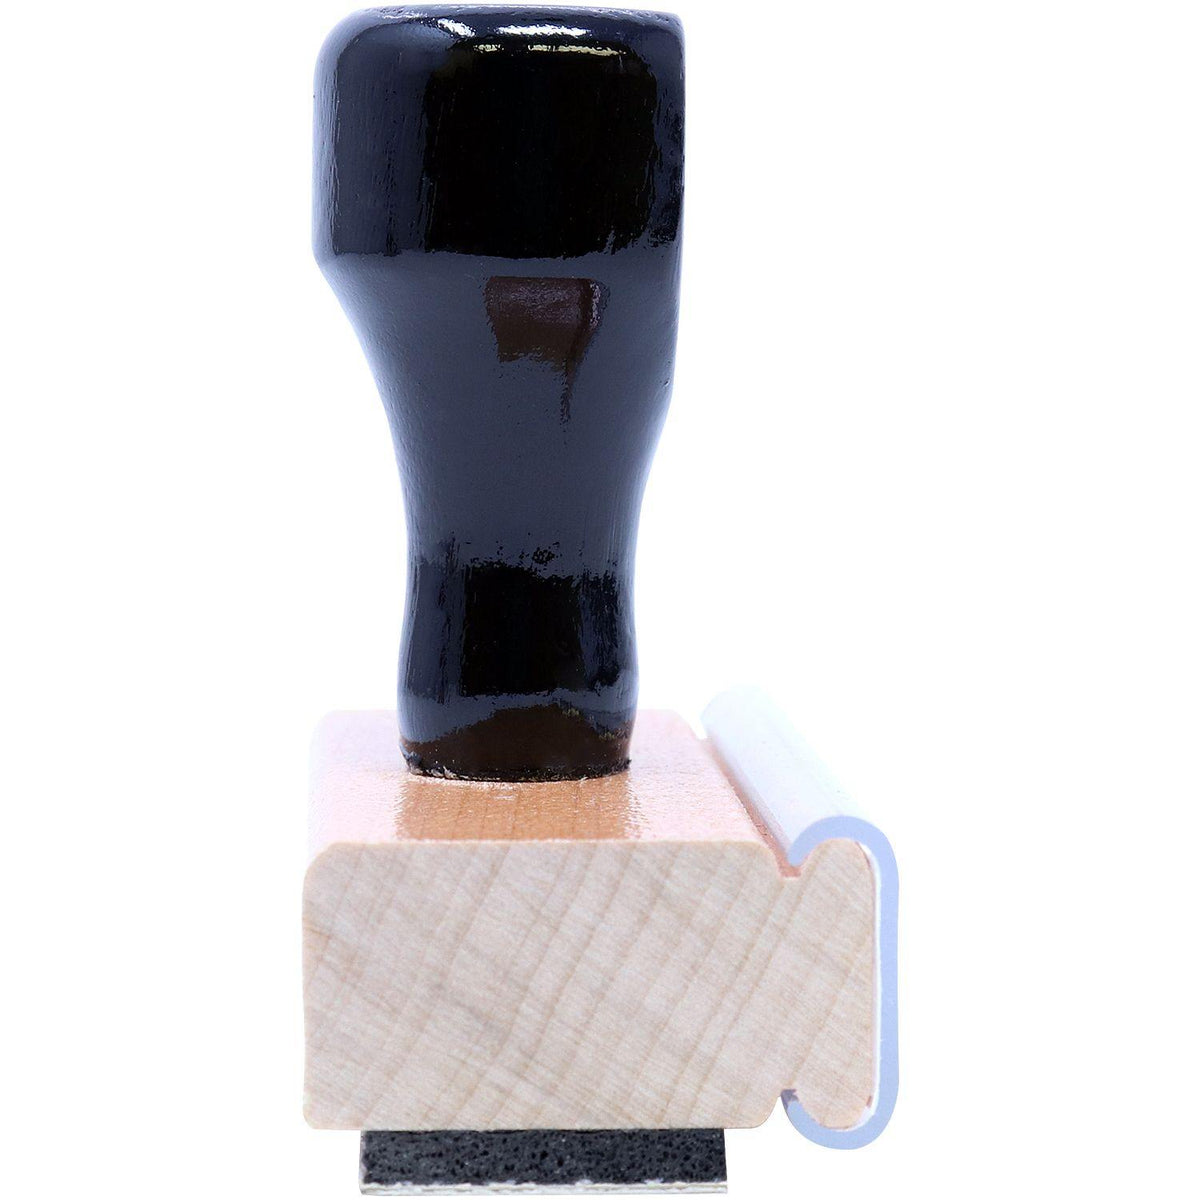 Postage Due Rubber Stamp - Engineer Seal Stamps - Brand_Acorn, Impression Size_Small, Stamp Type_Regular Stamp, Type of Use_General, Type of Use_Office, Type of Use_Postal